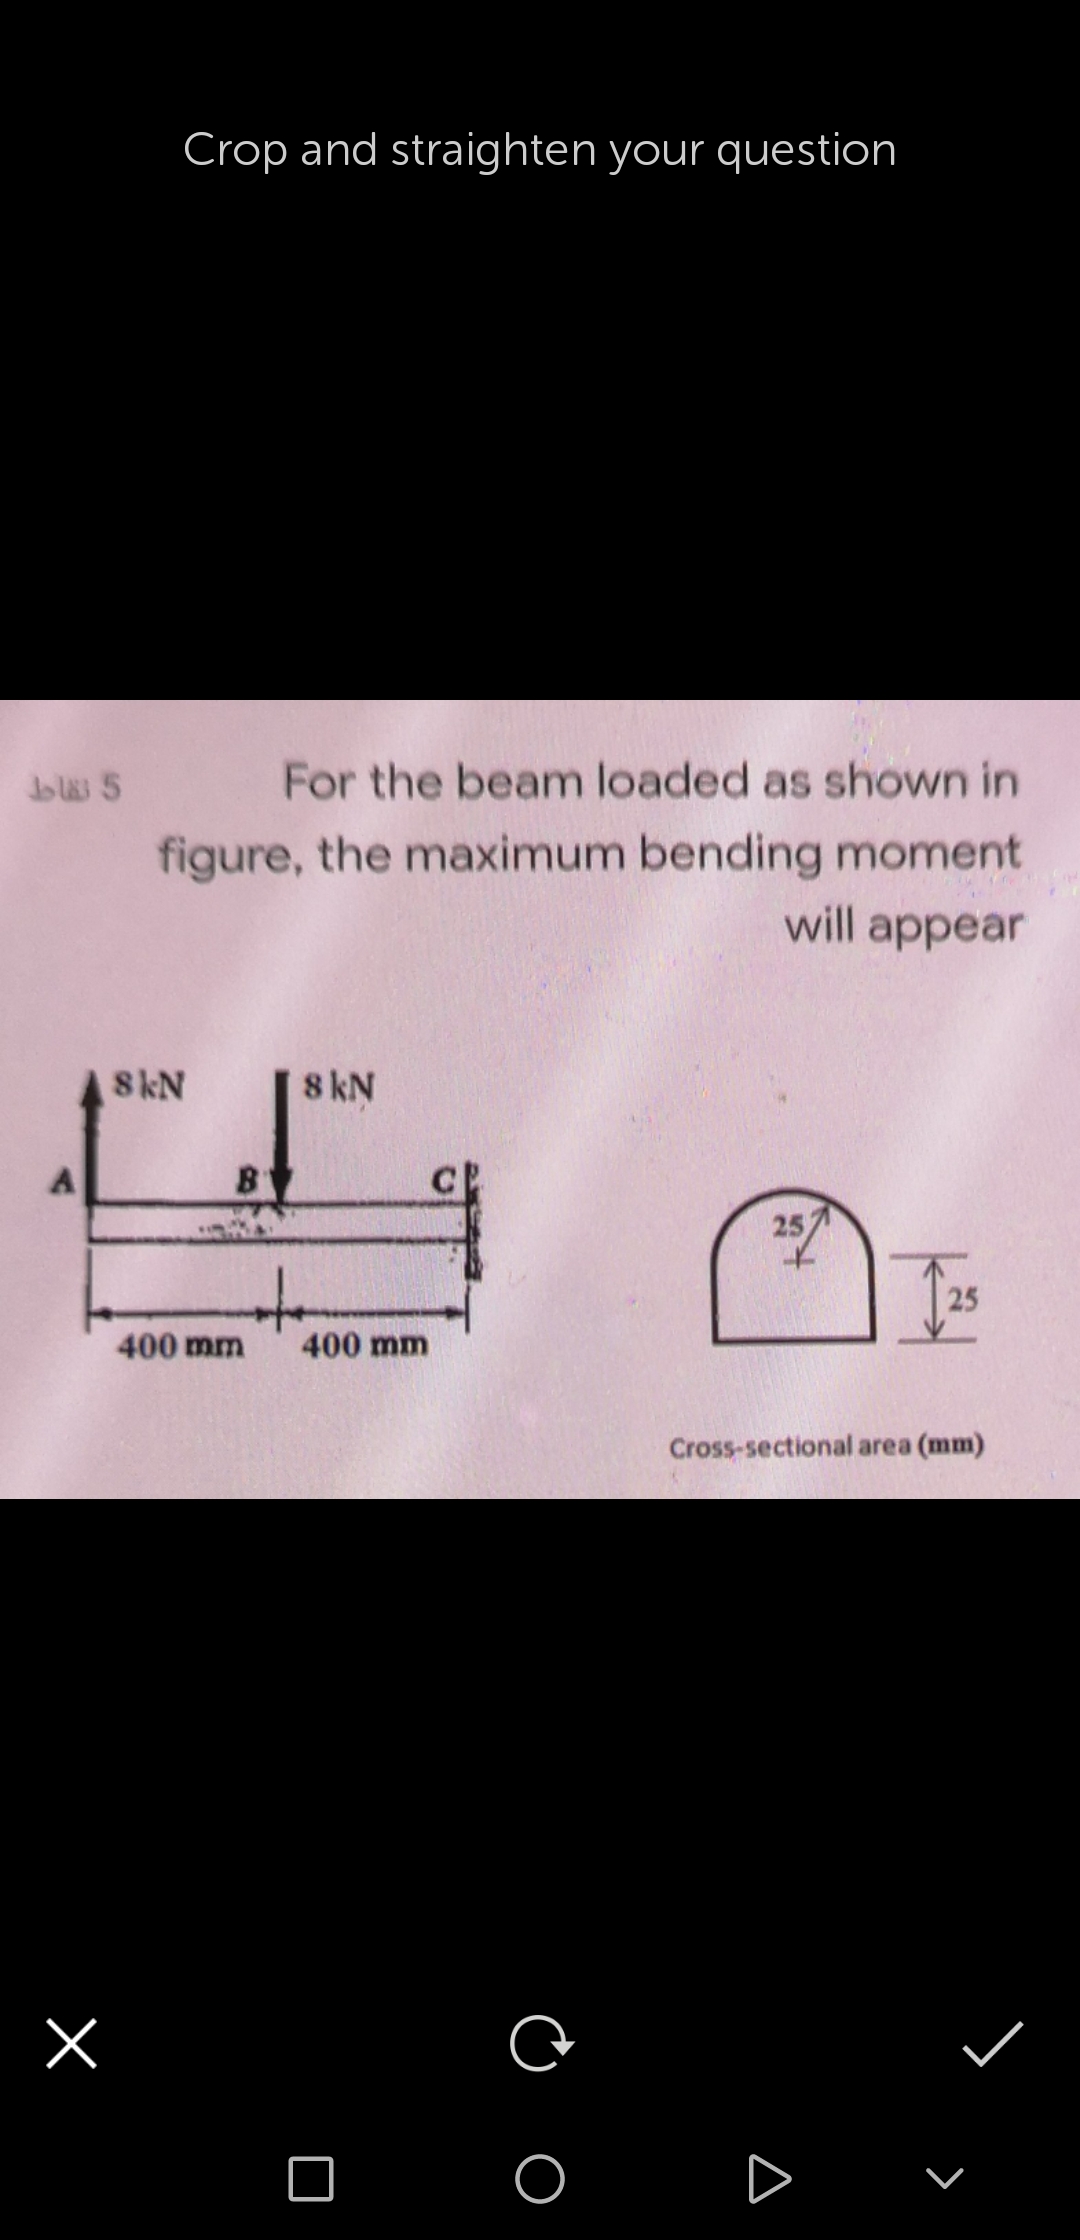 For the beam loaded as shown in
figure, the maximum bending moment
will appear
